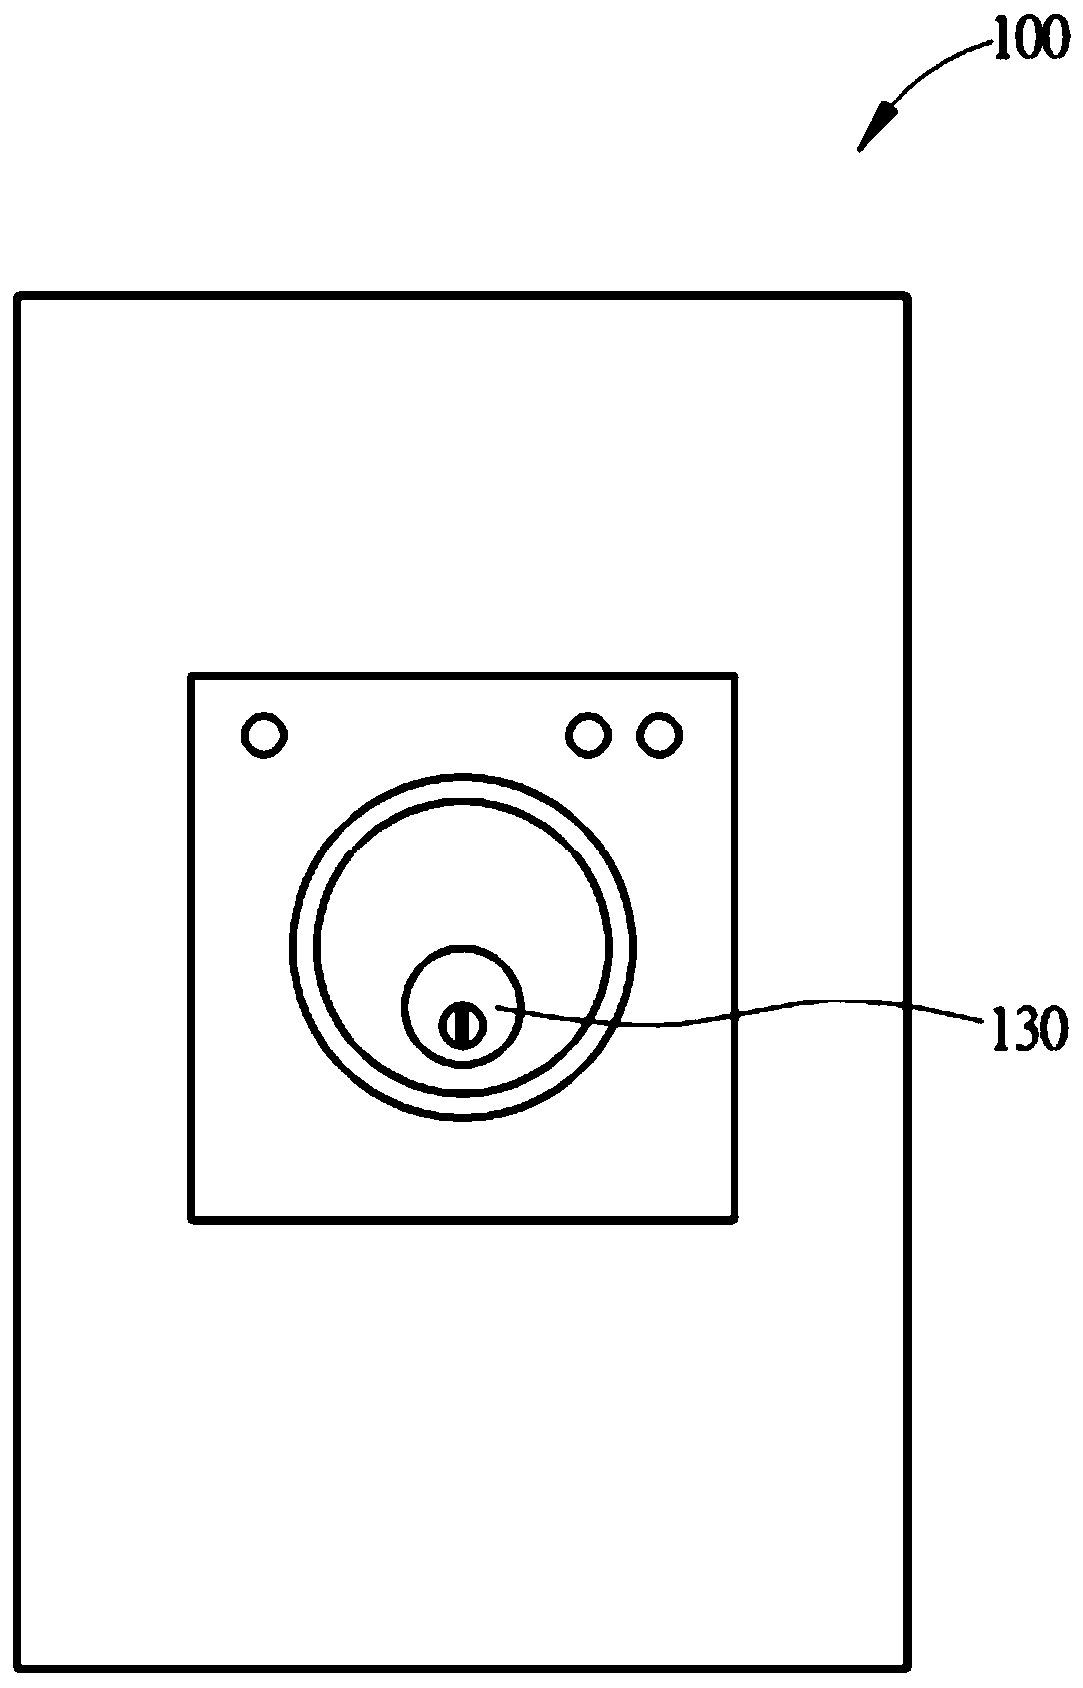 Electric lock and method for adding a user of the same